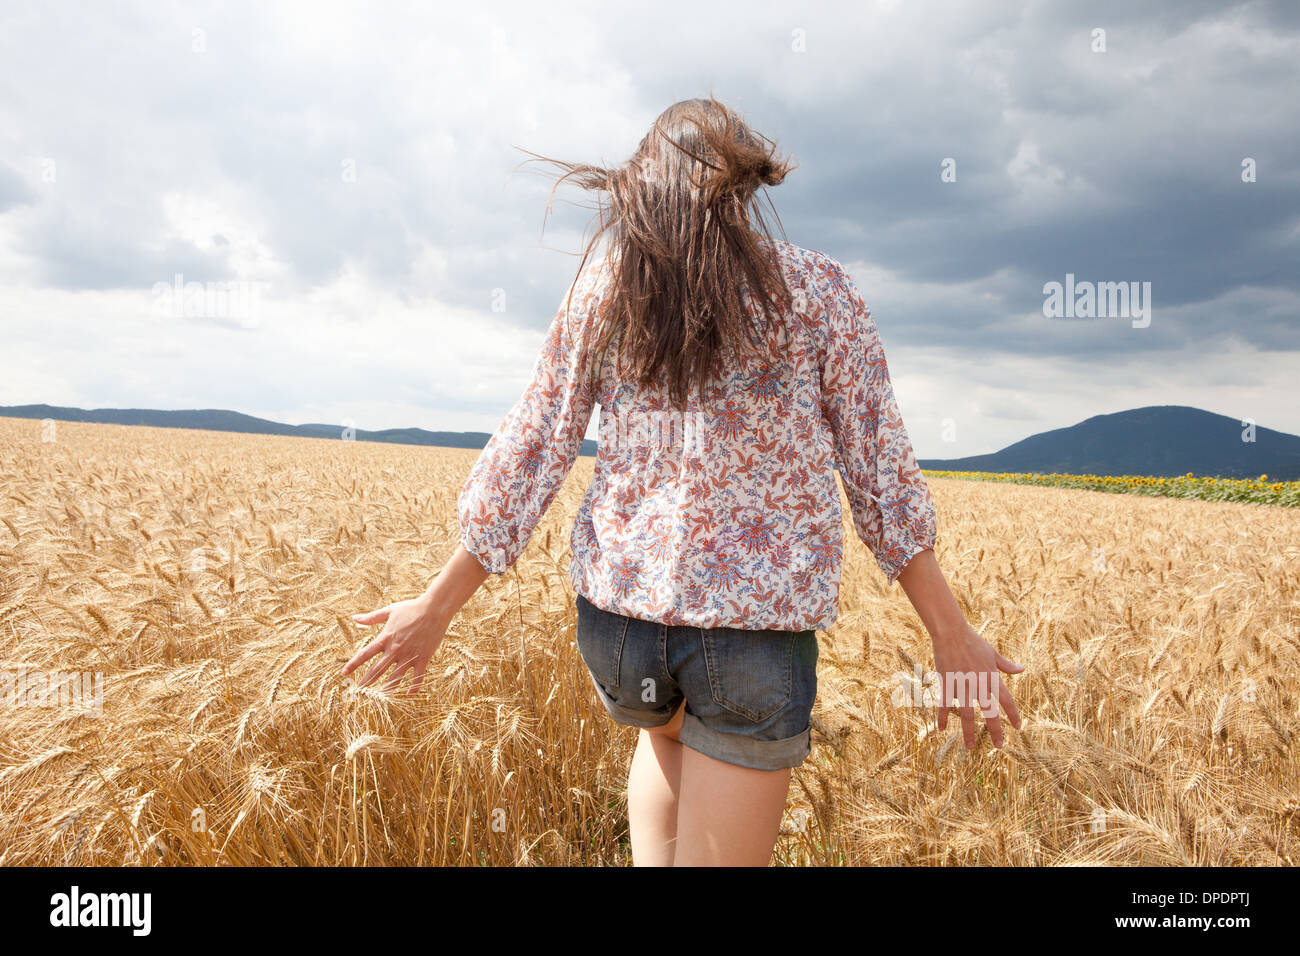 Mid adult woman walking through field Banque D'Images